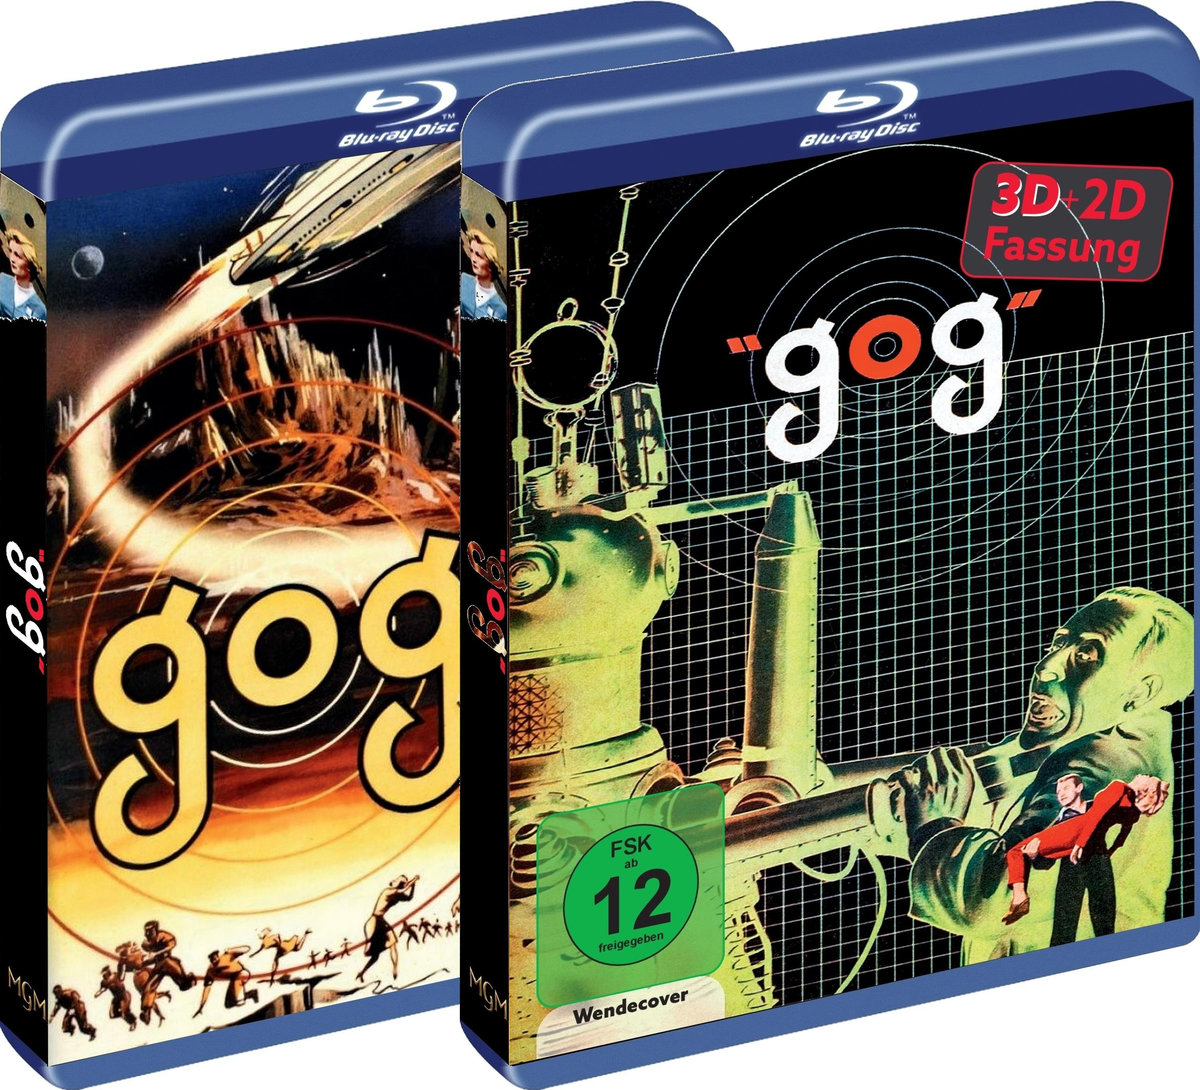 GOG - Spacestation USA - Limited Edition inkl. 3D Fassung (blu-ray)